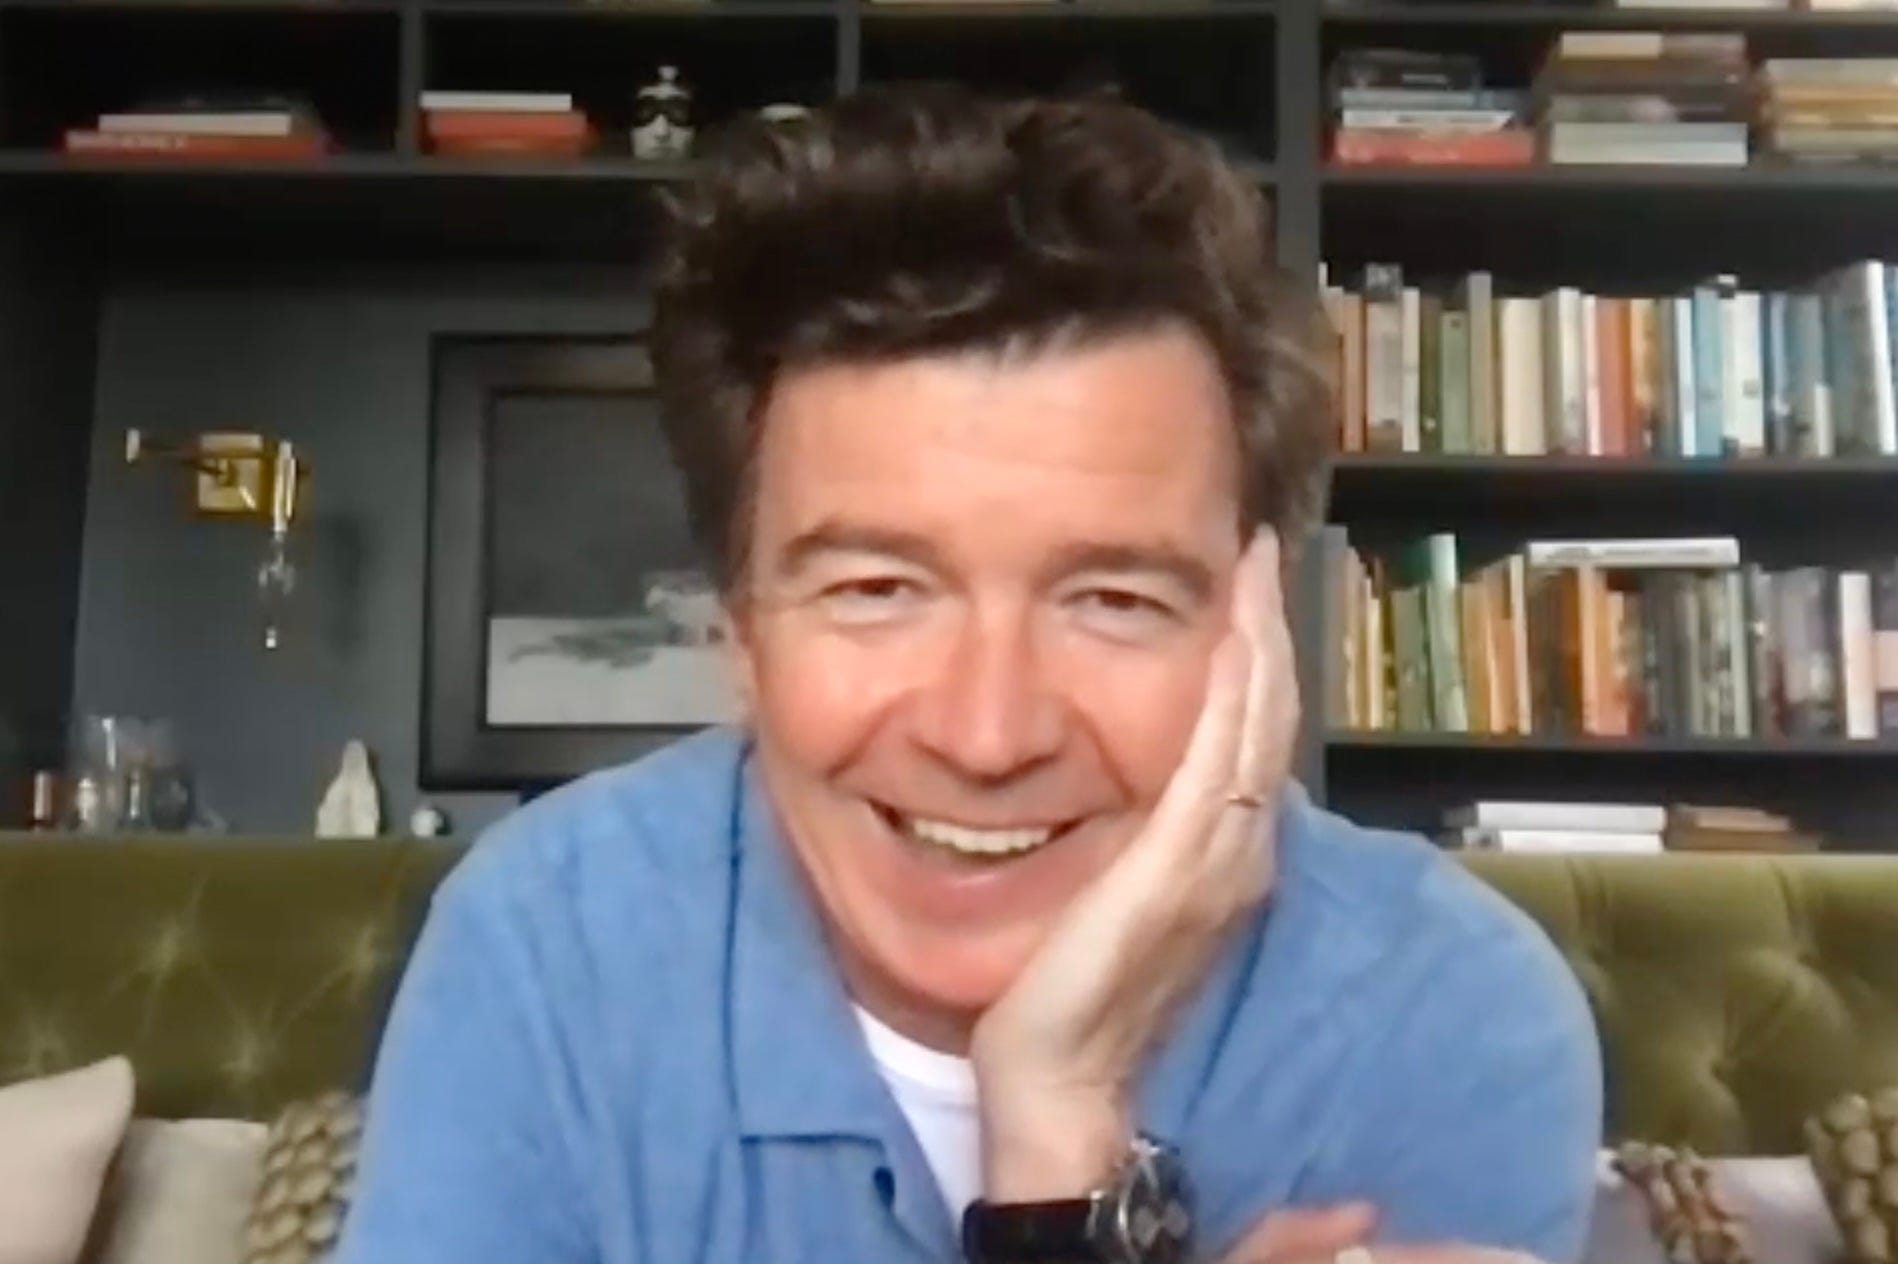 It's Rick Astley's World and We're All Just Rickrolling In It - SPIN